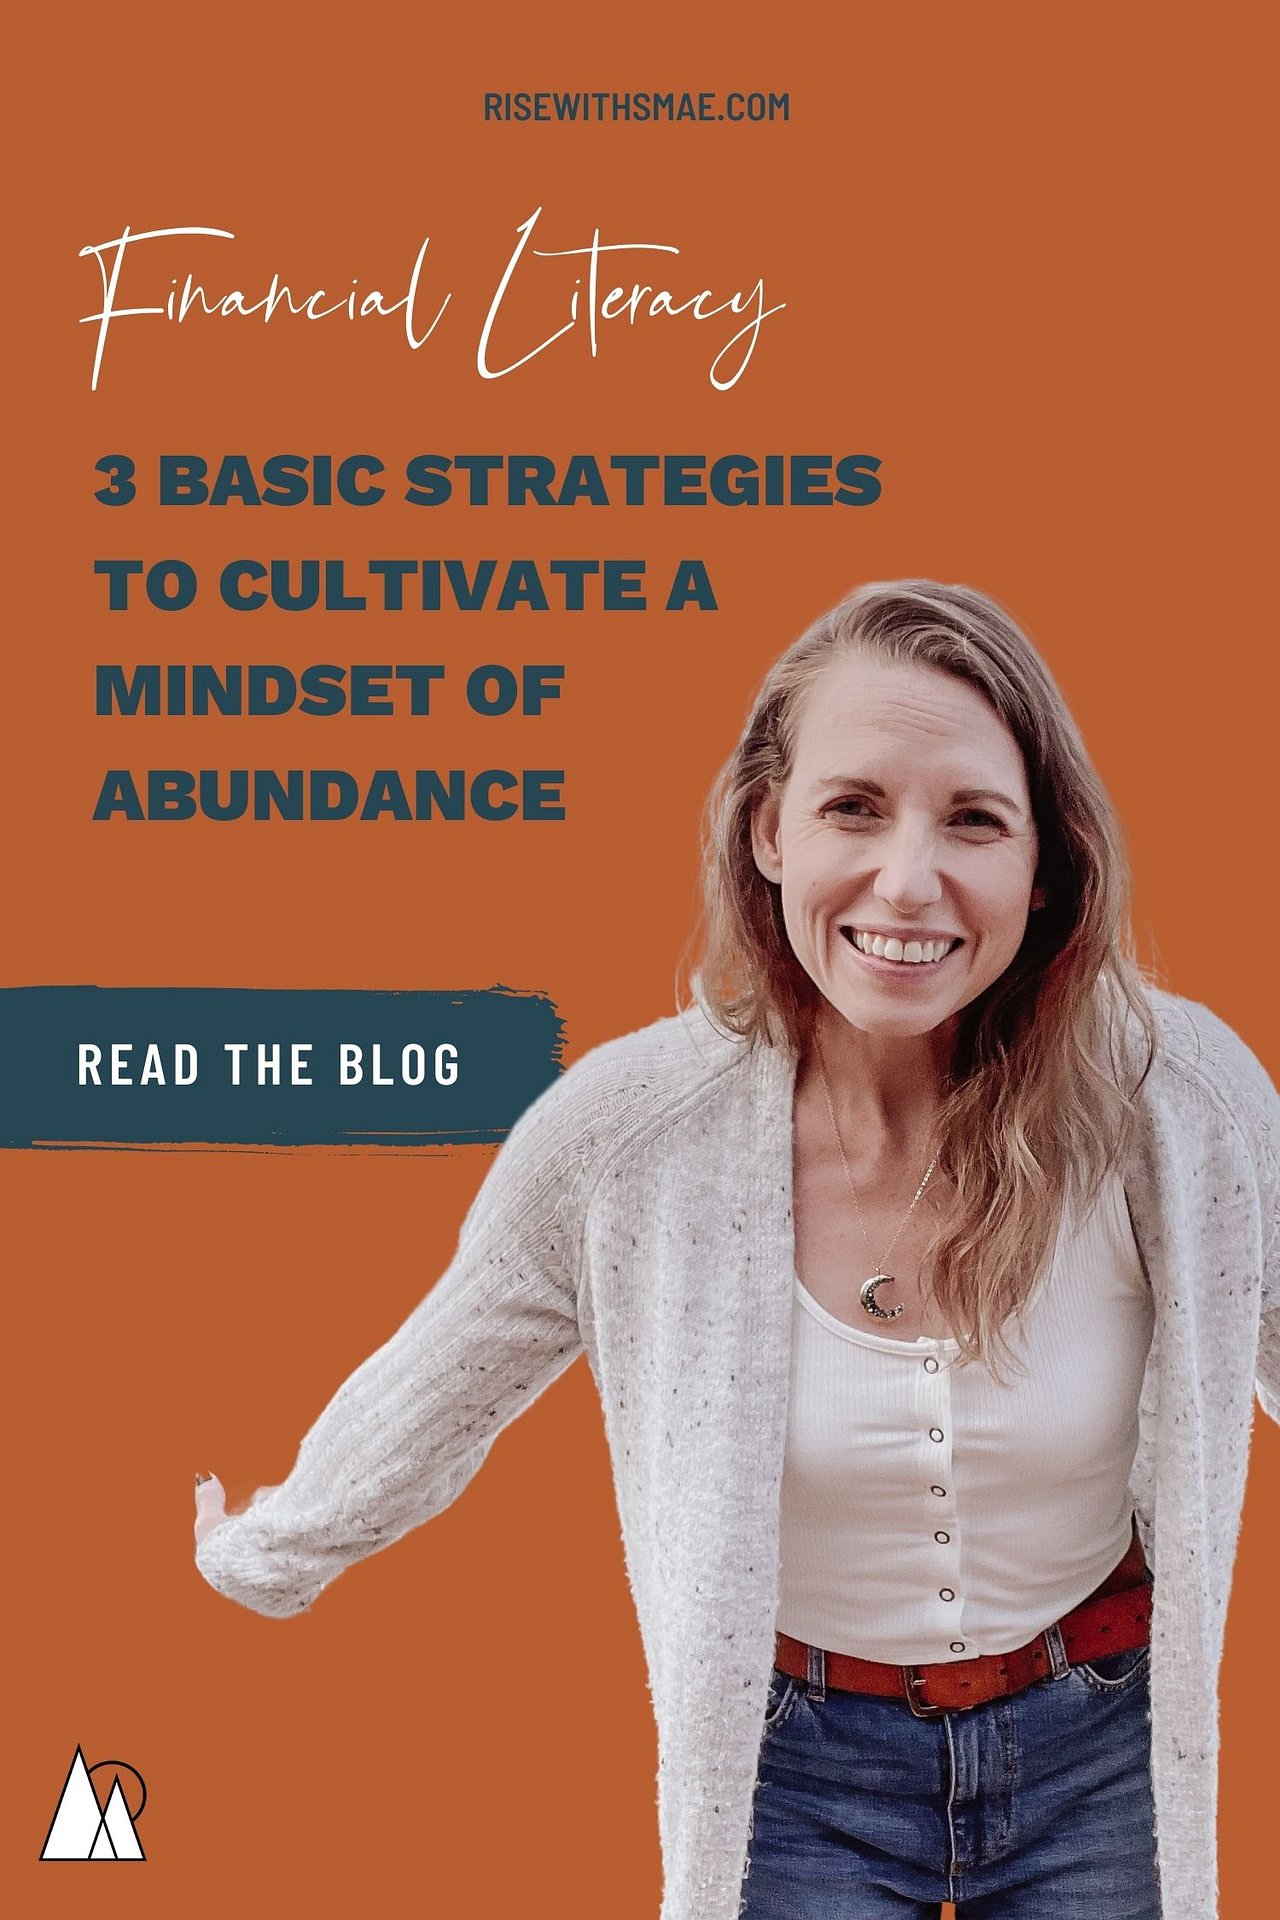 What’s Financial Literacy? 3 Basic Strategies to Cultivate a Mindset of Abundance